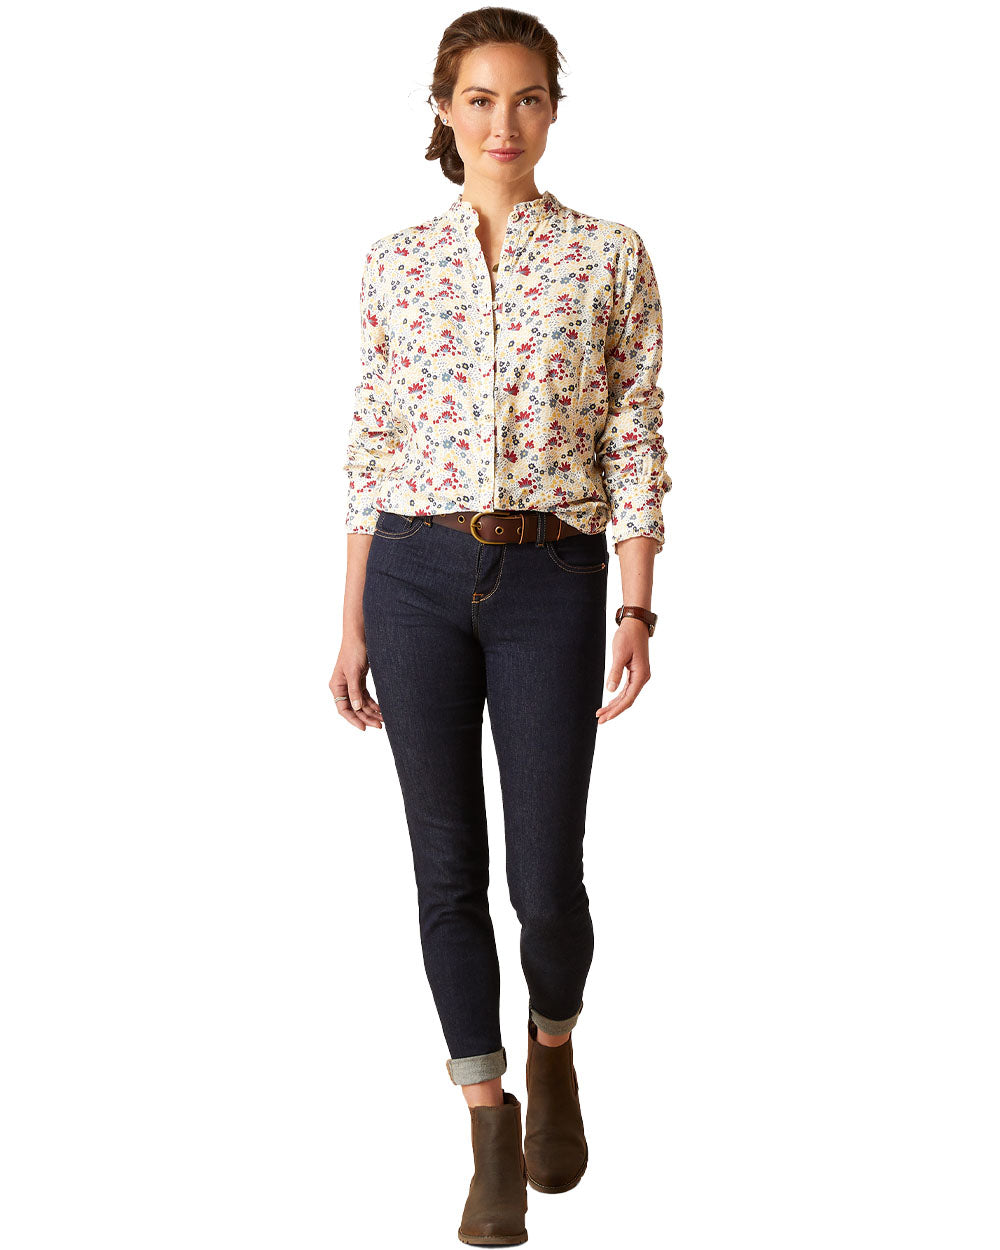 Mod Floral Ariat Womens Clarion Blouse on White background 